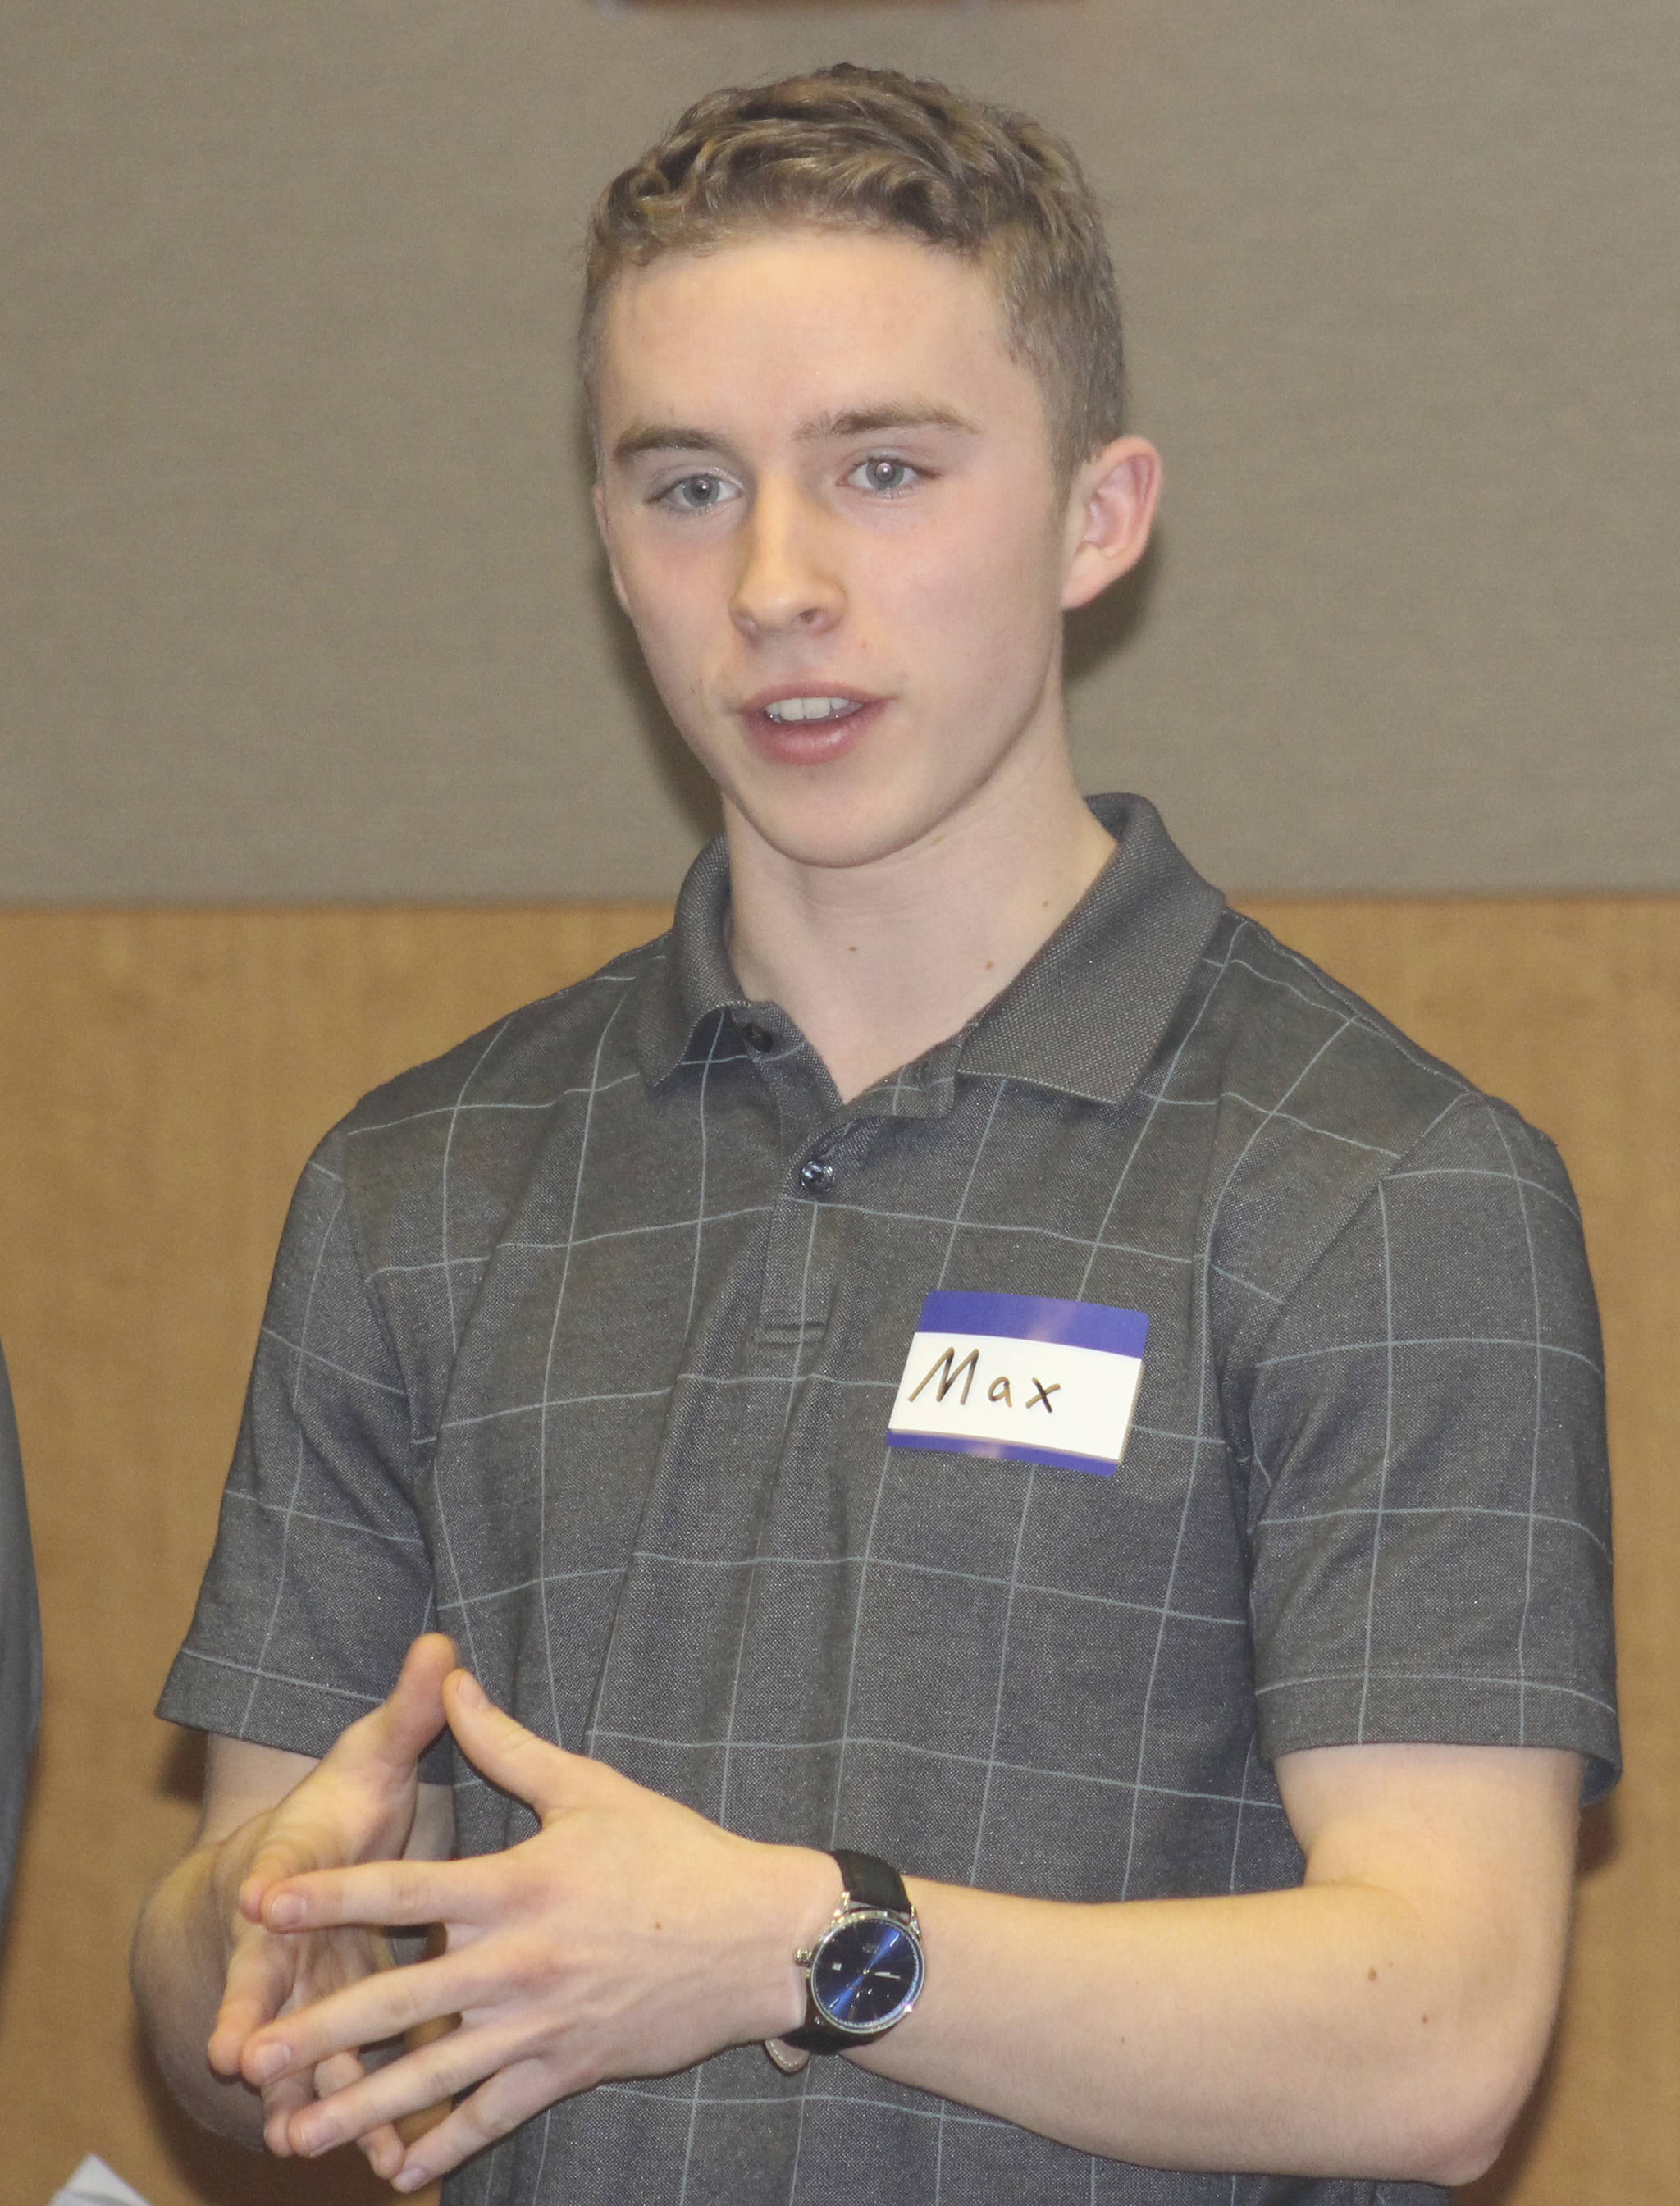 Staff photo/Hayley Day                                Max Mattox presents at the local Rotary club on Dec. 19.